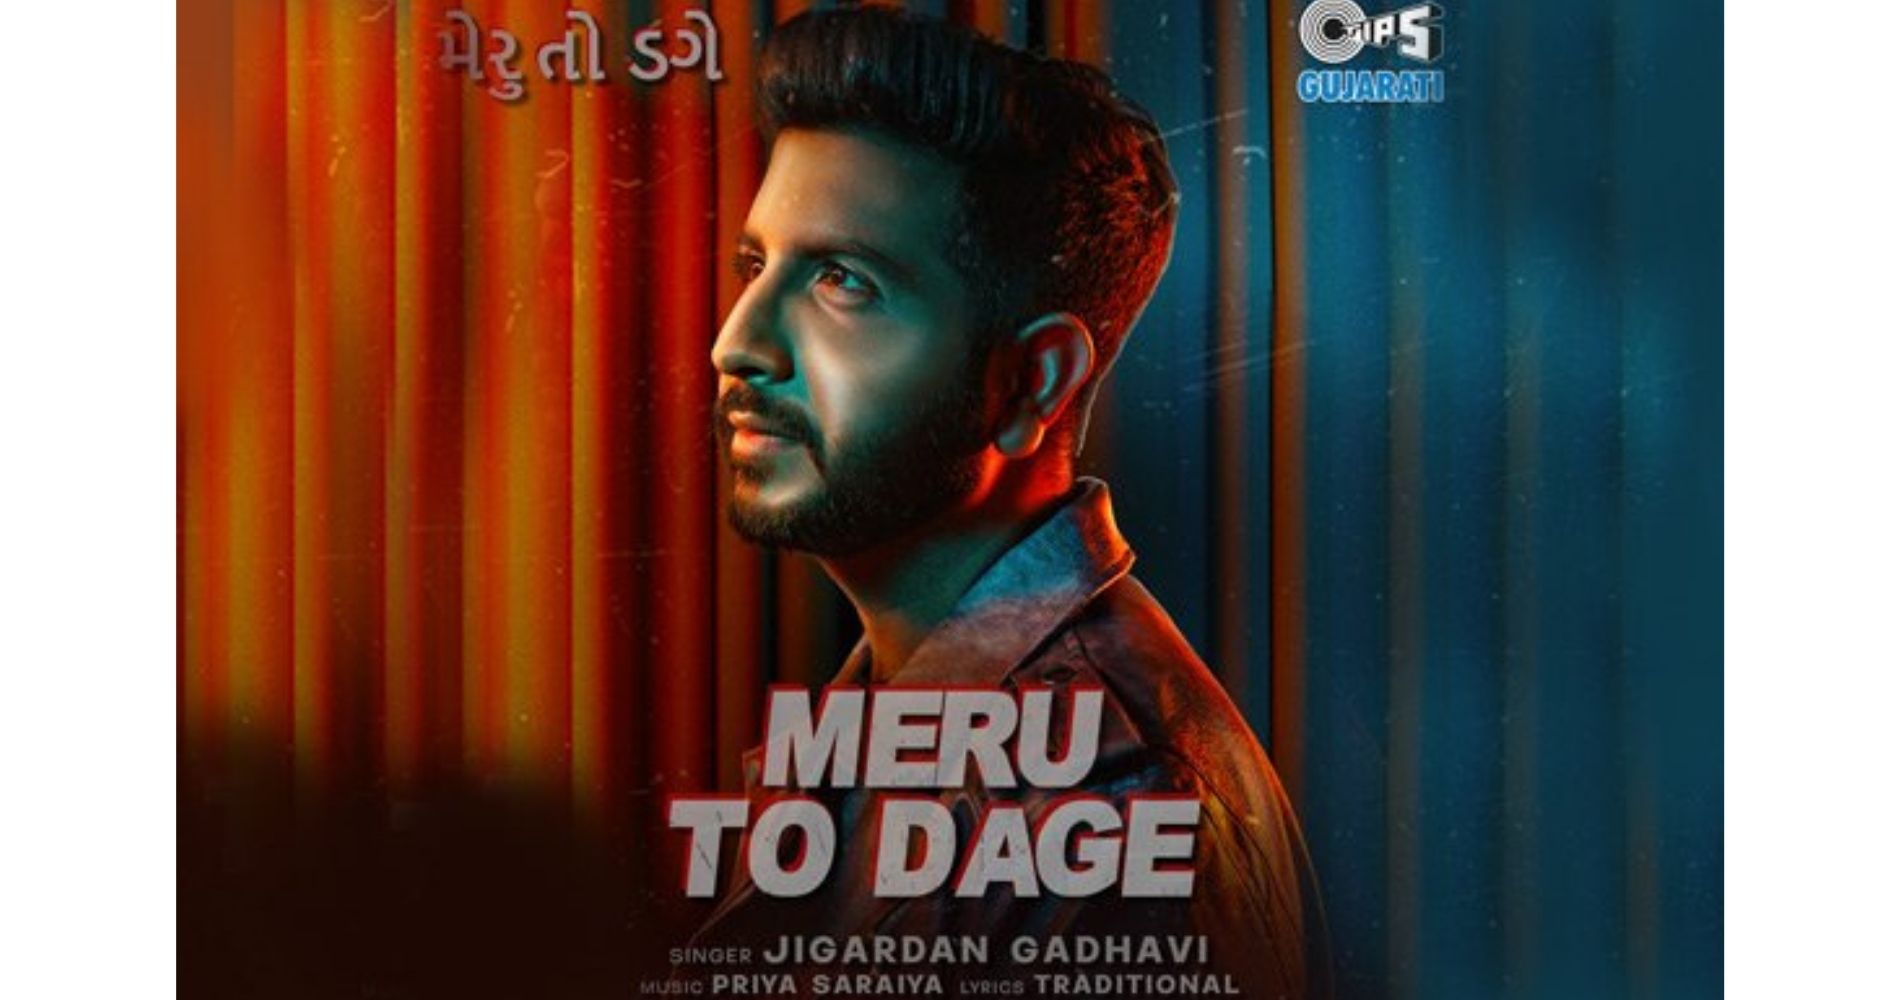 Tips music launches new Gujarati song  “Meru to Dage” sung...